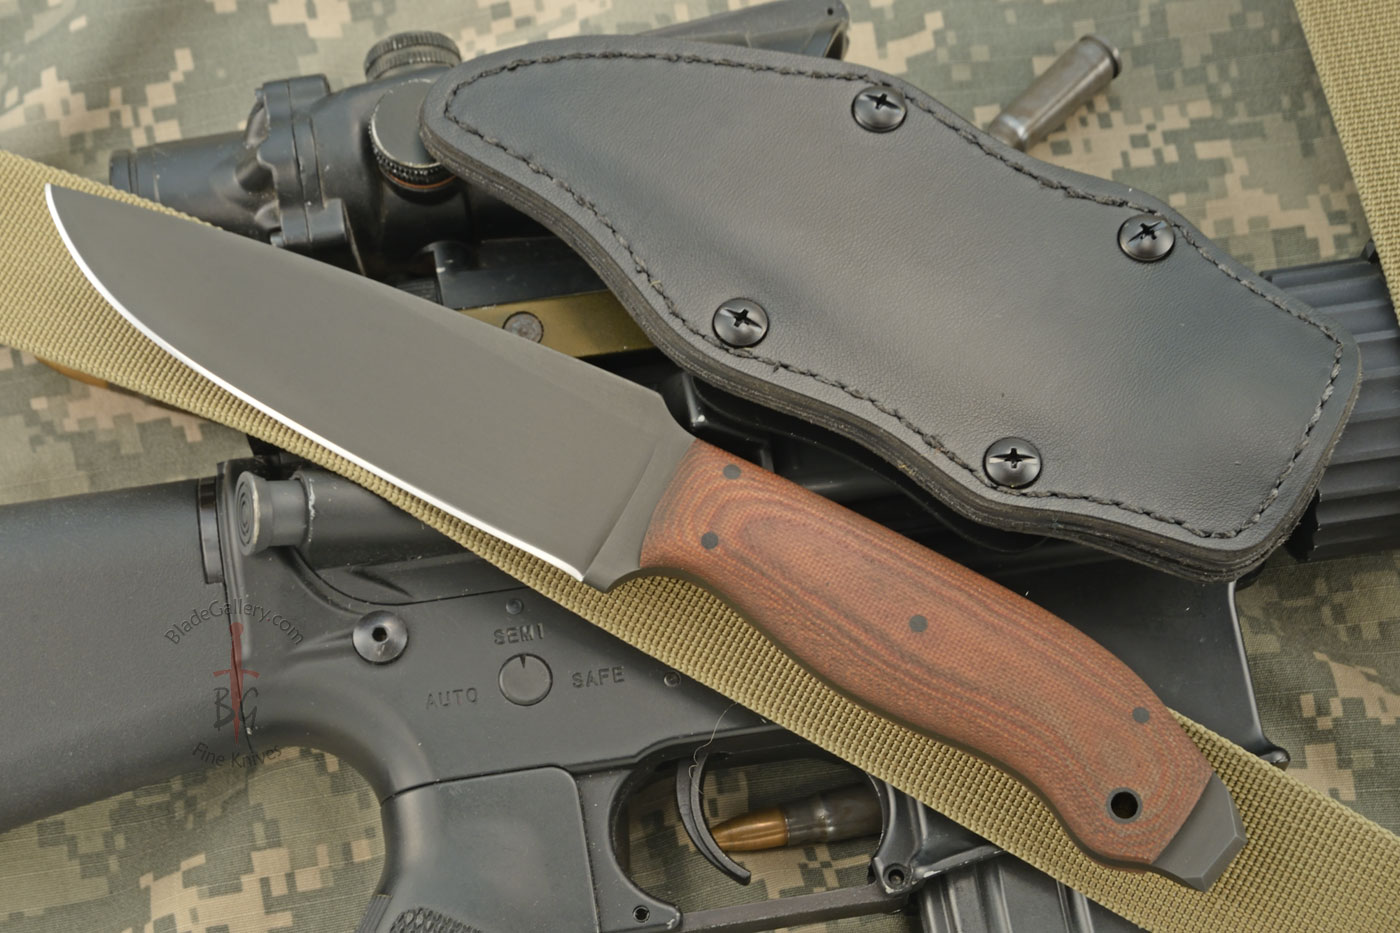 Drop Point Crusher Belt Knife with Tan Laminate